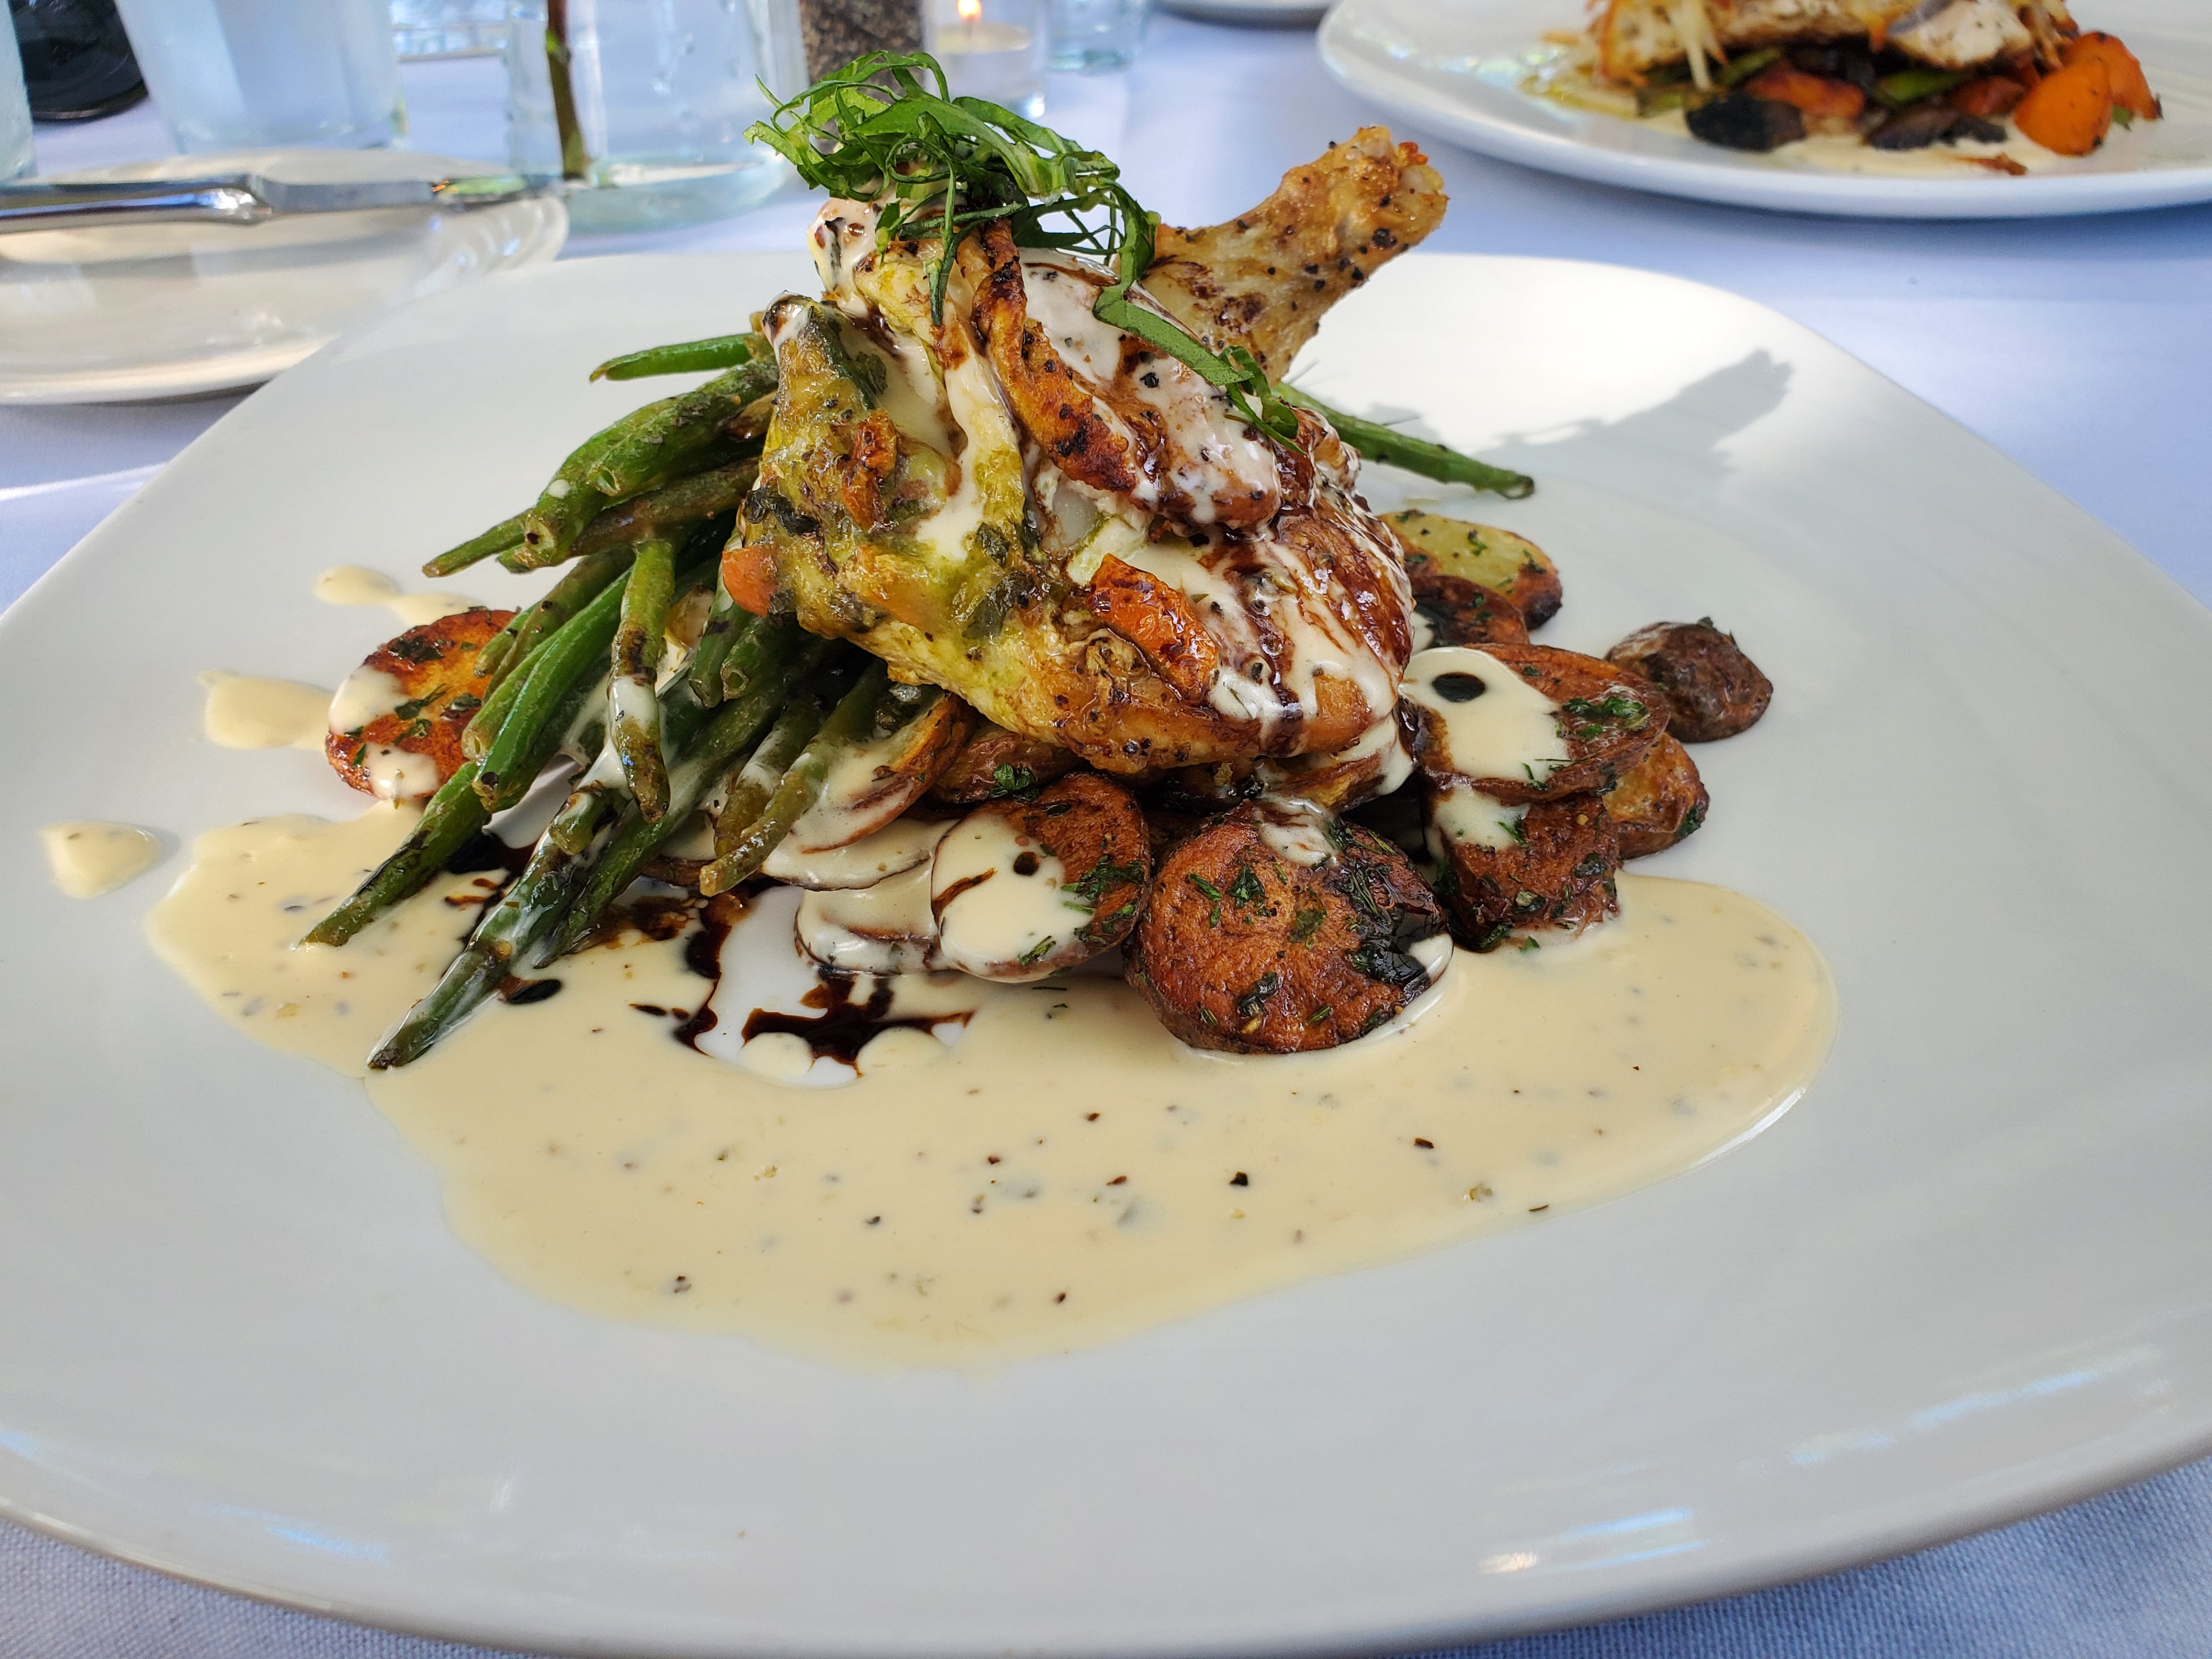 A beautifully plated dish of Caprese stuffed chicken with fingerling potatoes and haricots verts with a pale yellow citrus cream sauce pooling at the bottom. Photo by Carl Busch.